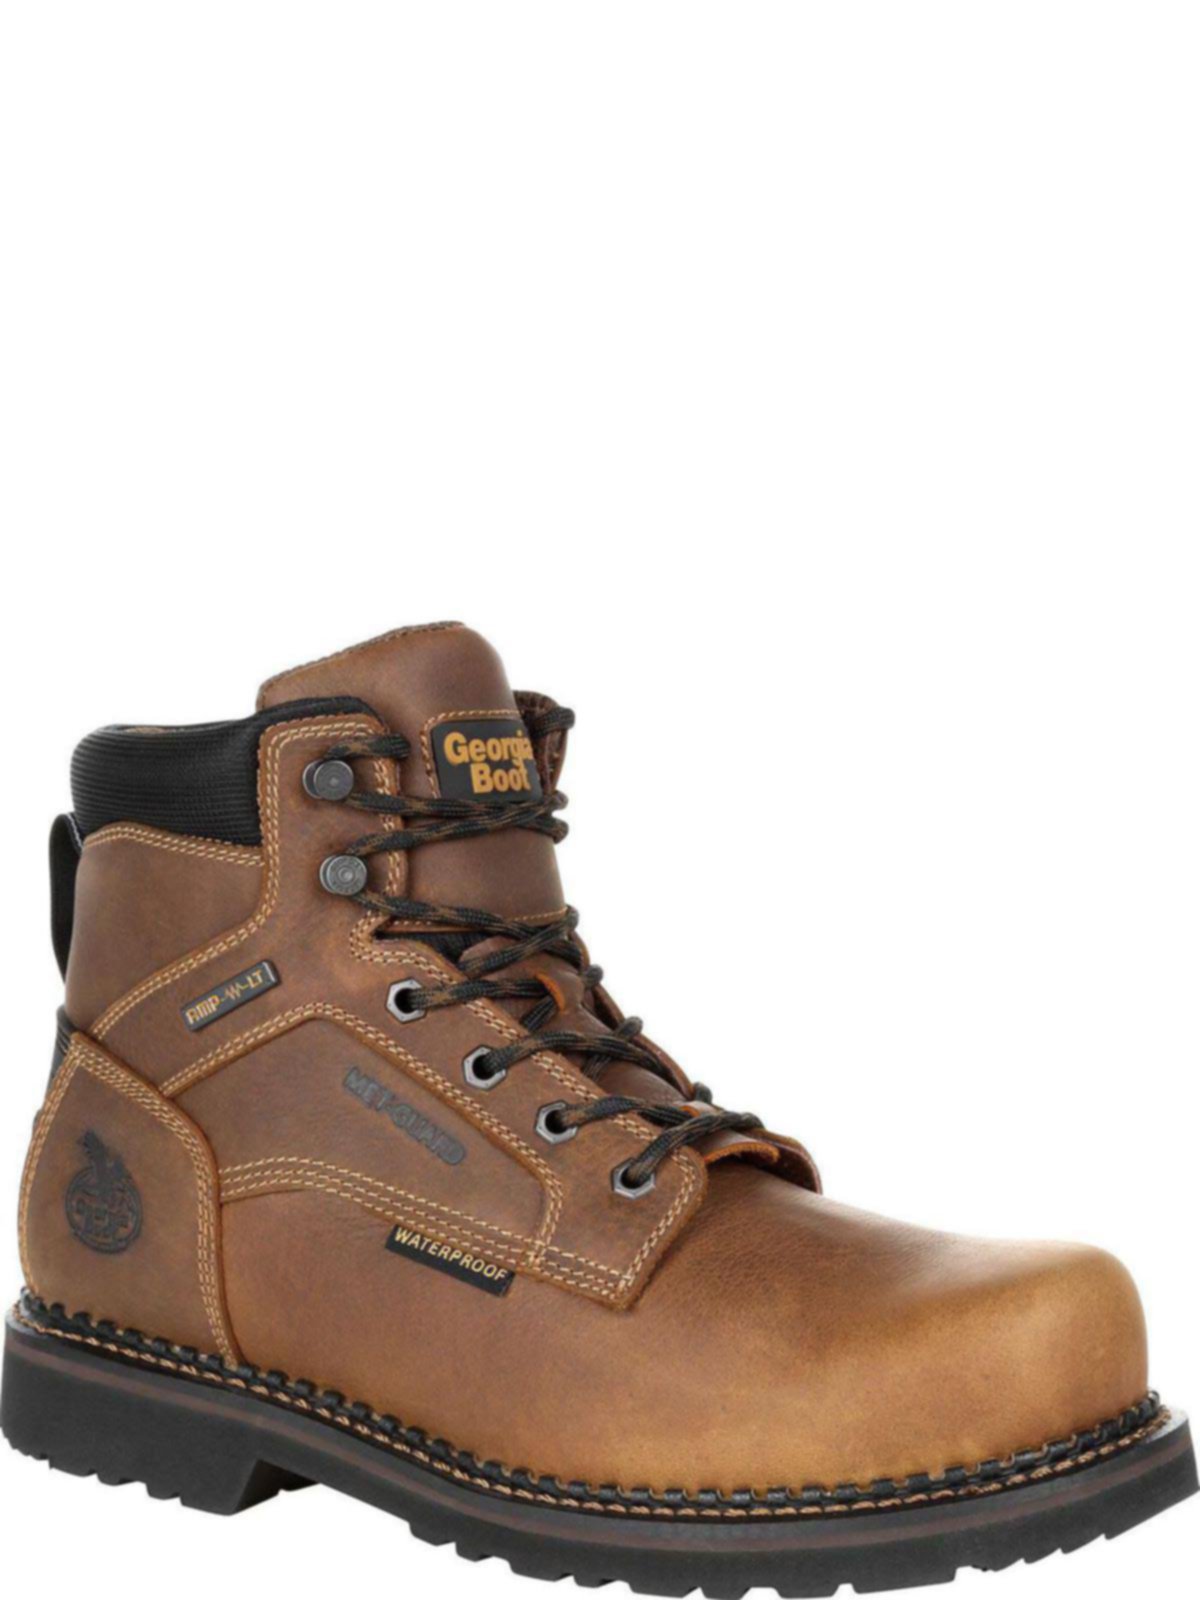 astm f2413 boots